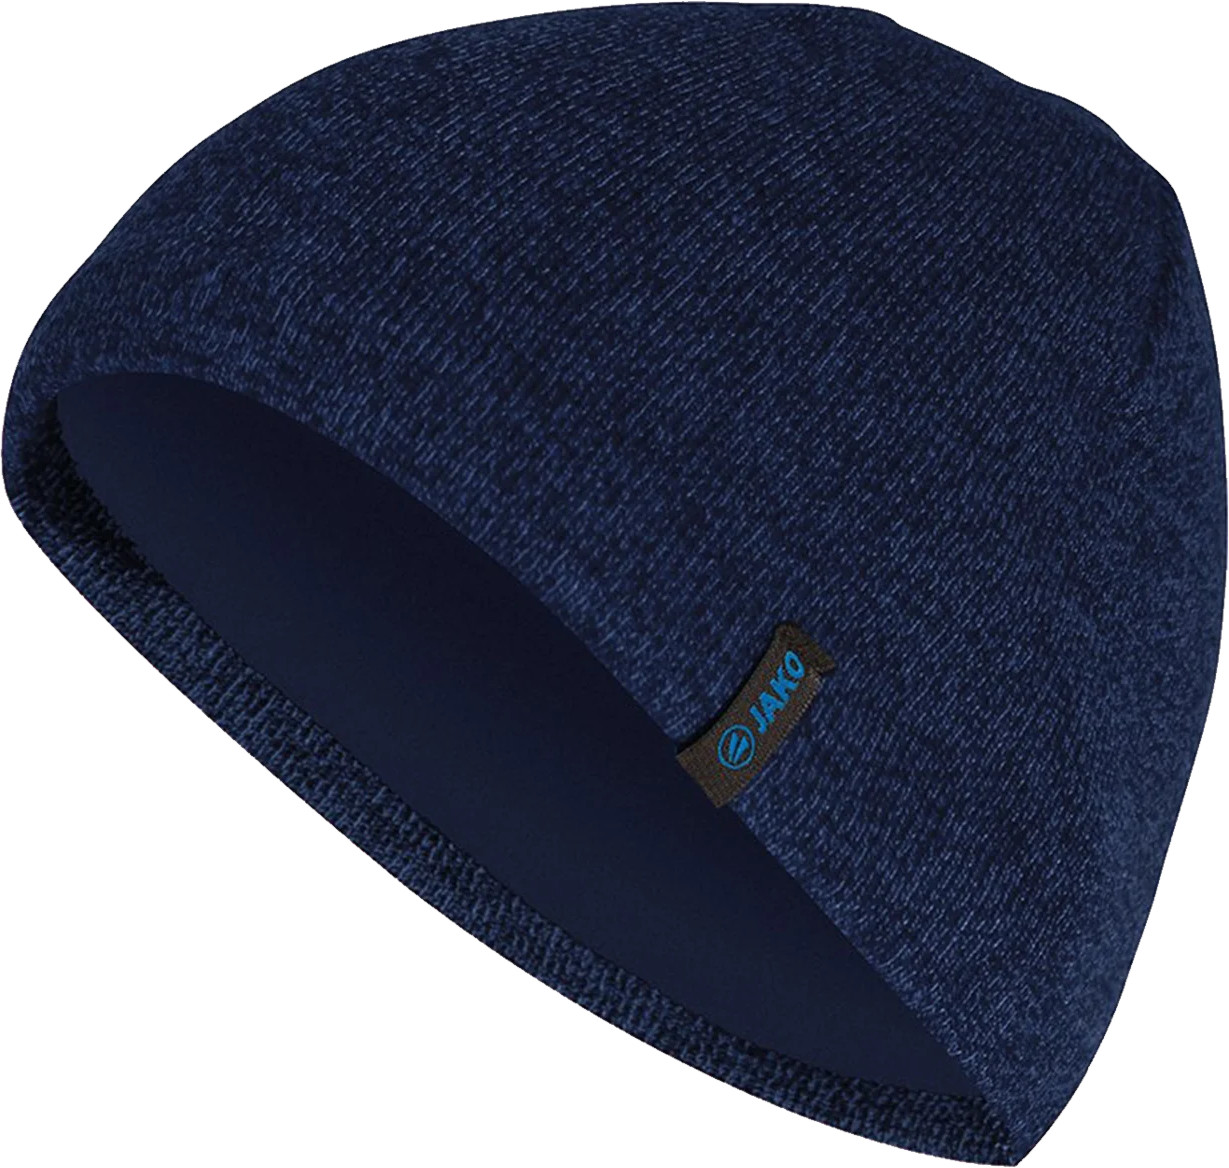 Hat JAKO Knitted cap